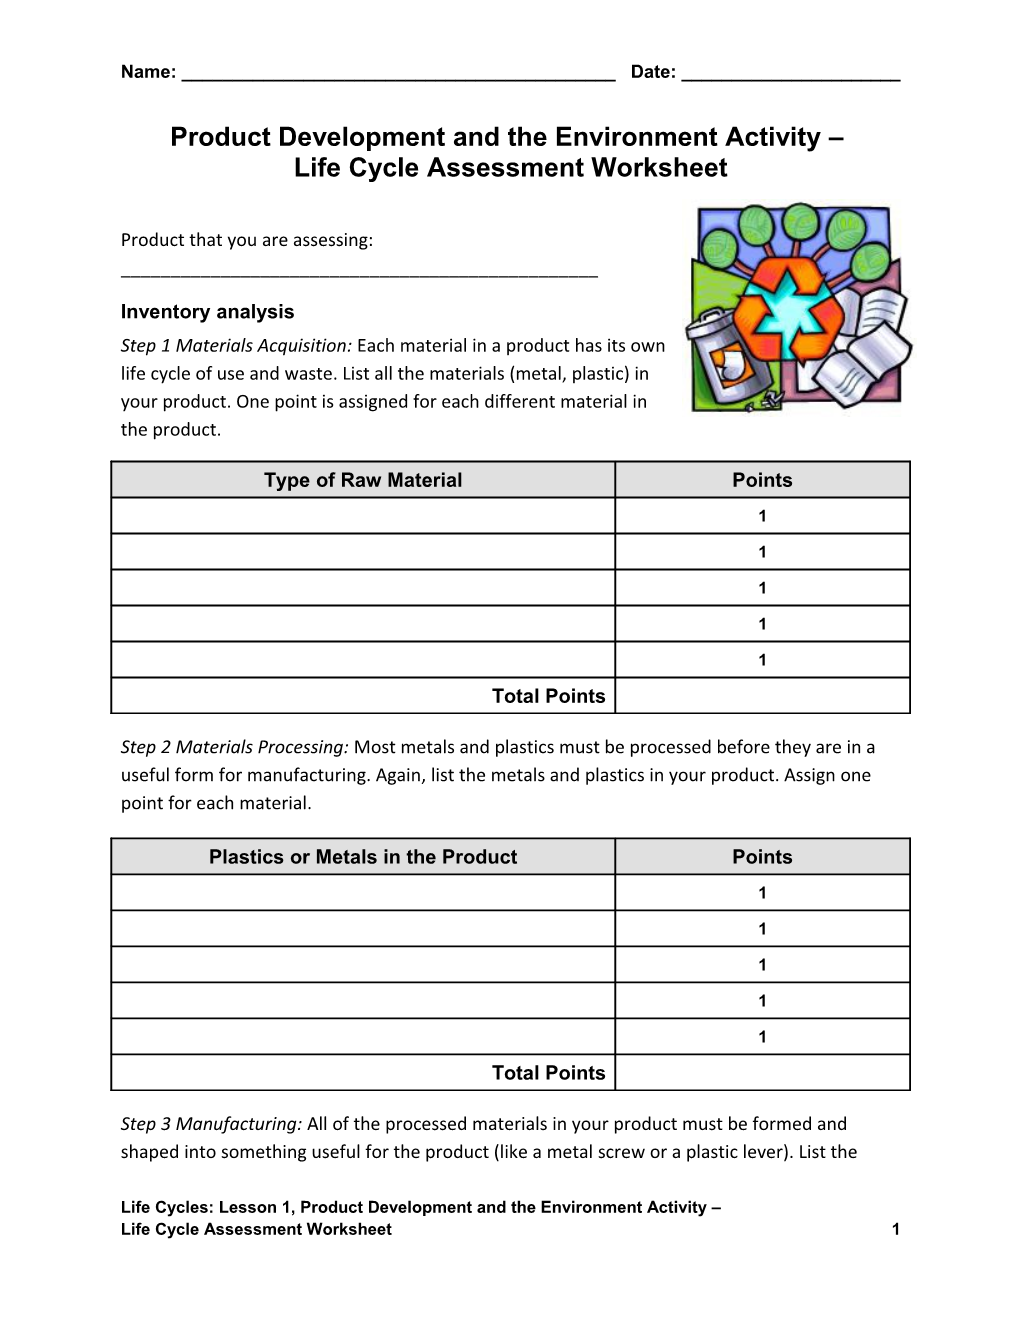 Product Development and the Environment Activity Life Cycle Assessment Worksheet